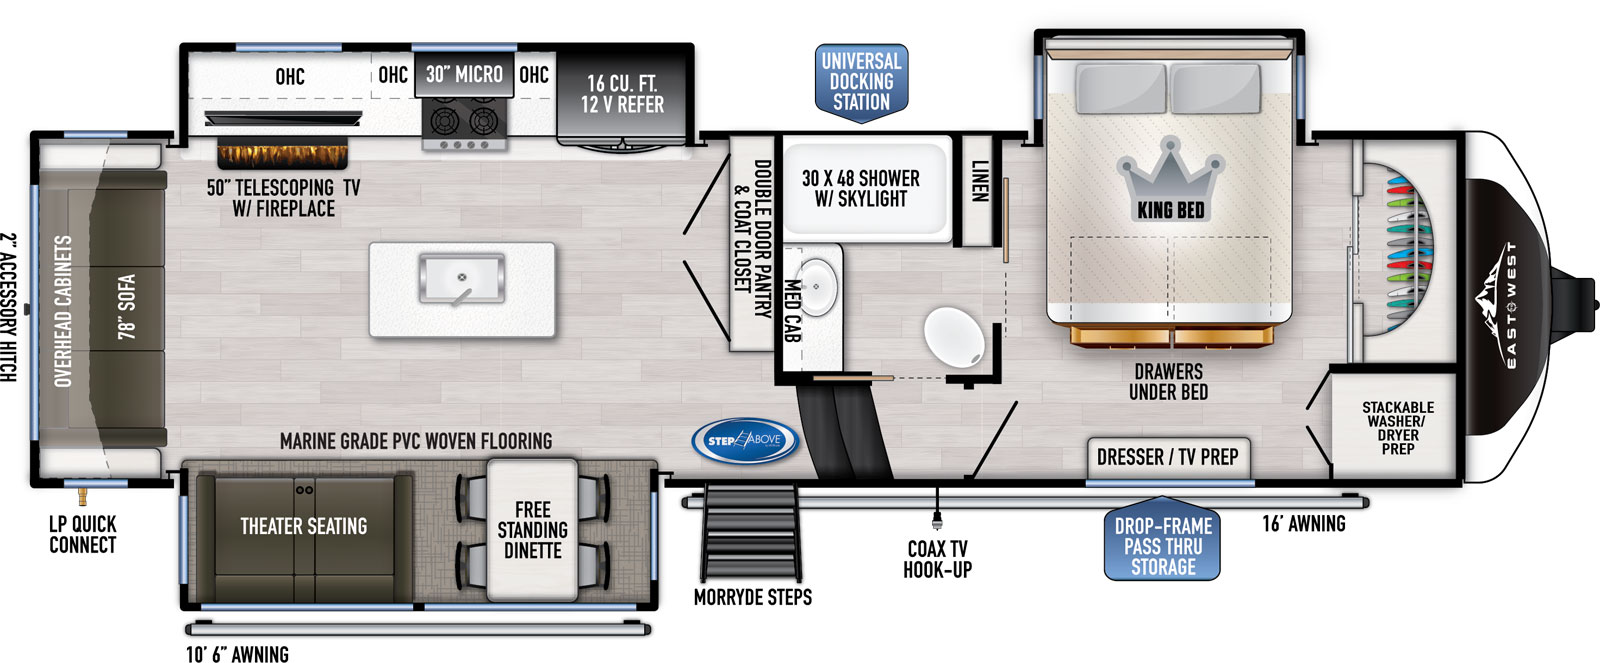 The 325 RL has 3 slide outs, two on the off door side and one on the door side along with one entry door. Interior layout from front to back: front bedroom with front closet and off door side slide-out with king bed and underbed storage; side aisle bathroom with solid pocket doors, shower, medicine cabinet above the sink and a porcelain toilet; kitchen living dining area features a double door pantry and coat closet; kitchen island with deep seated sink; off door side slide-out containing refrigerator, oven, microwave and entertainment center; door side slide-out containing dinette and theater seating; and a 78" wide rear sofa with 72" wide rear window and overhead cabinets above.